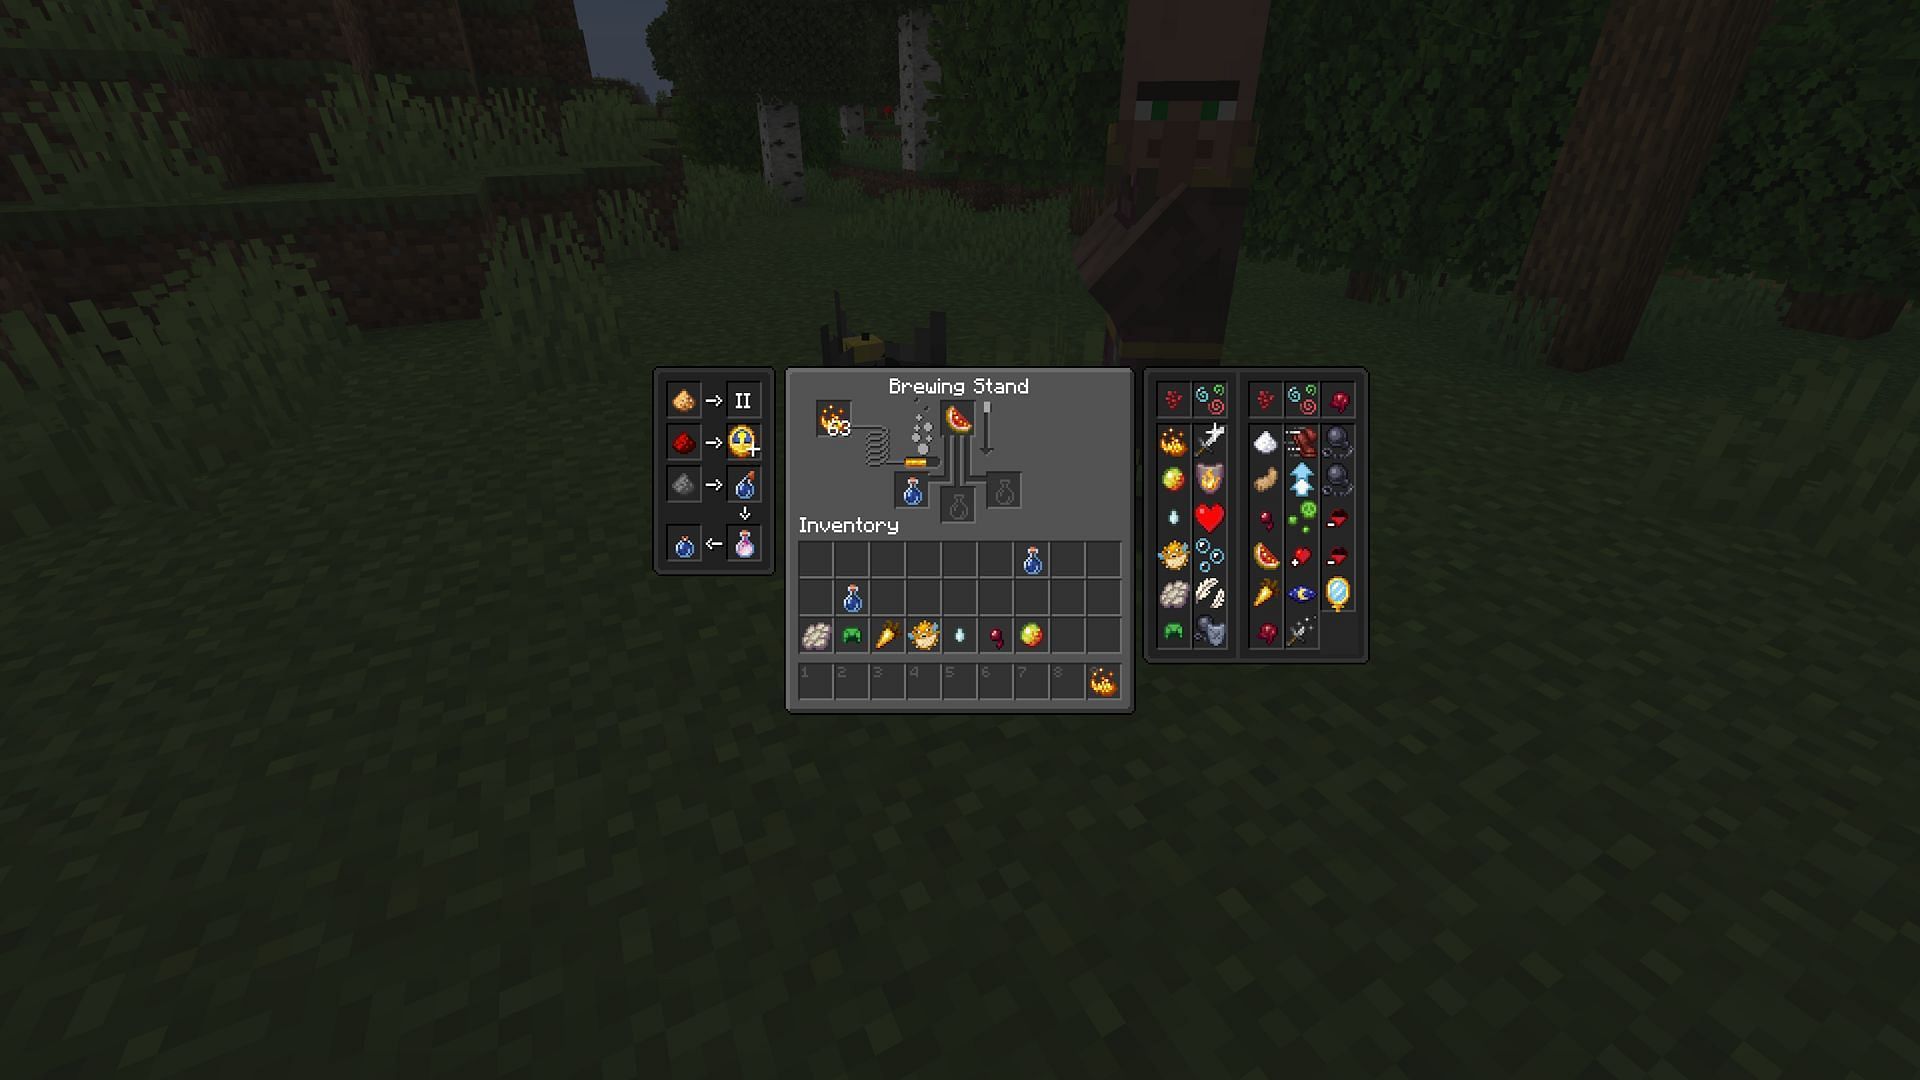 Potions of health require glistering melon slices to brew (Image via Mojang)